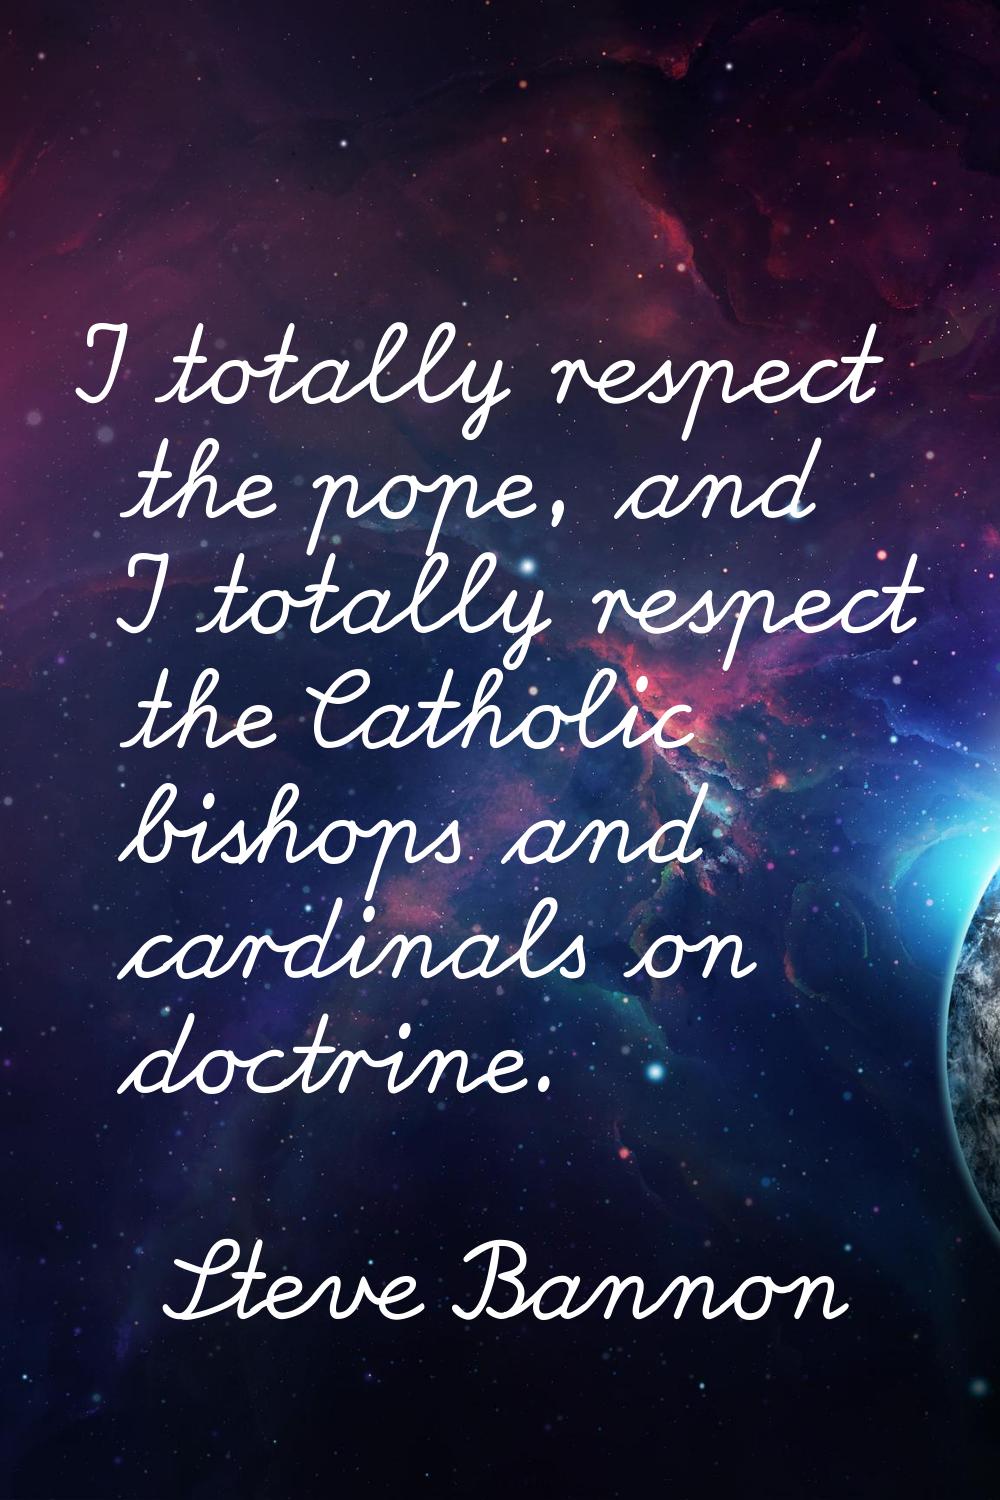 I totally respect the pope, and I totally respect the Catholic bishops and cardinals on doctrine.